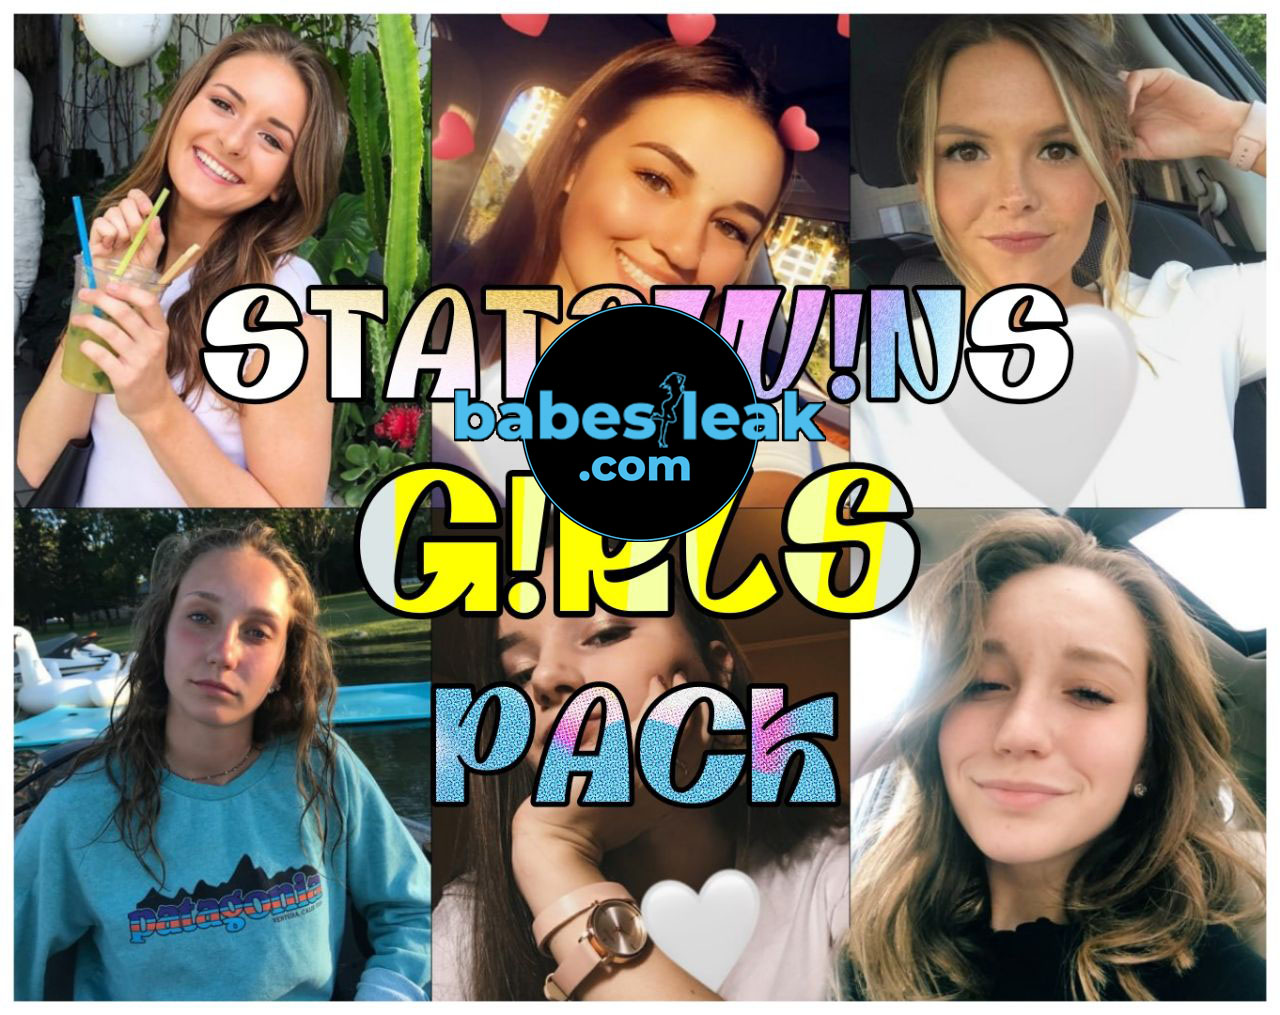 Premium 13 Statewins Girls Pack Stw052 Onlyfans Leaks Snapchat Leaks Statewins Leaks